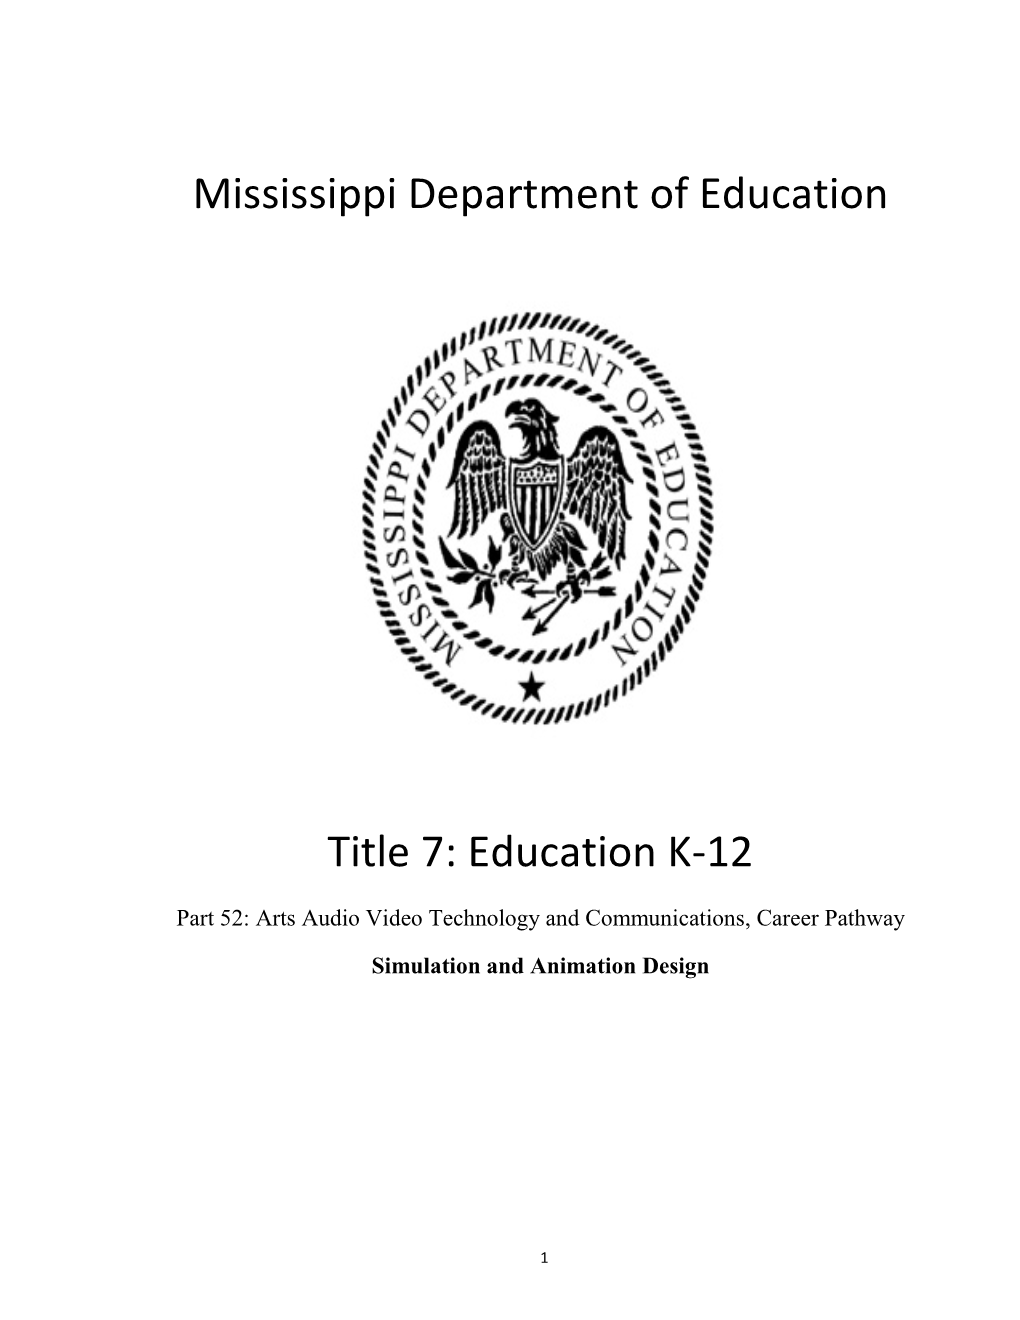 Mississippi Department of Education Title 7: Education K-12